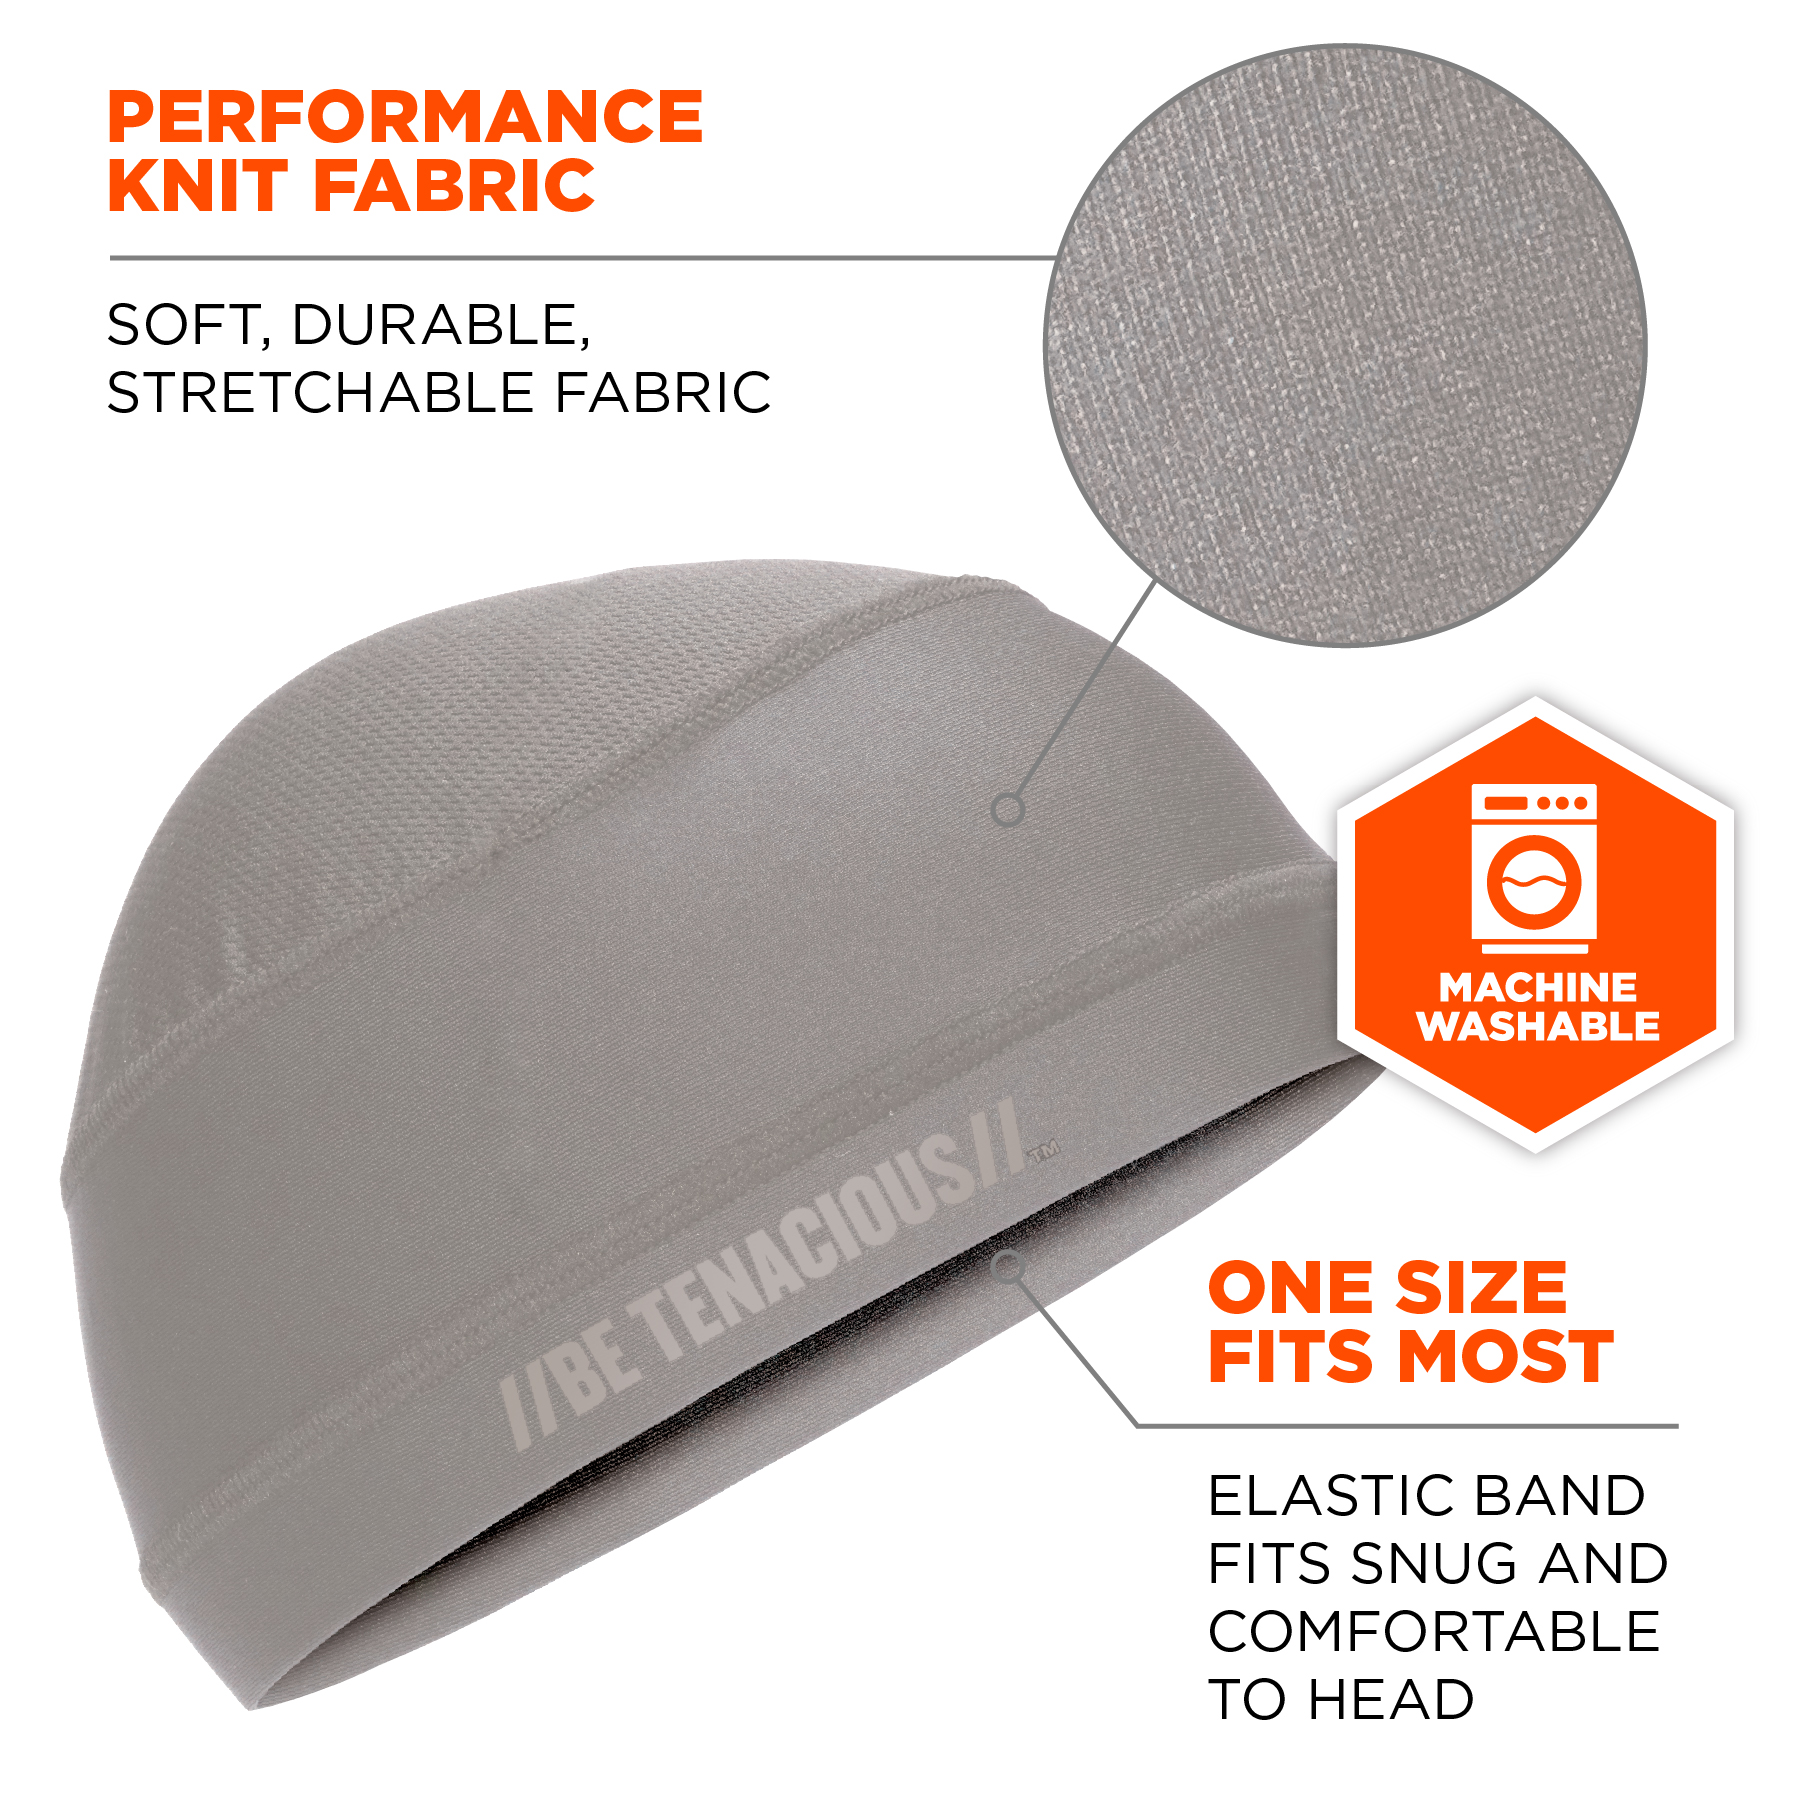 https://www.ergodyne.com/sites/default/files/product-images/12708-6632-cooling-skull-cap-gray-performance-knit-fabric-one-size-fits-most_0.jpg